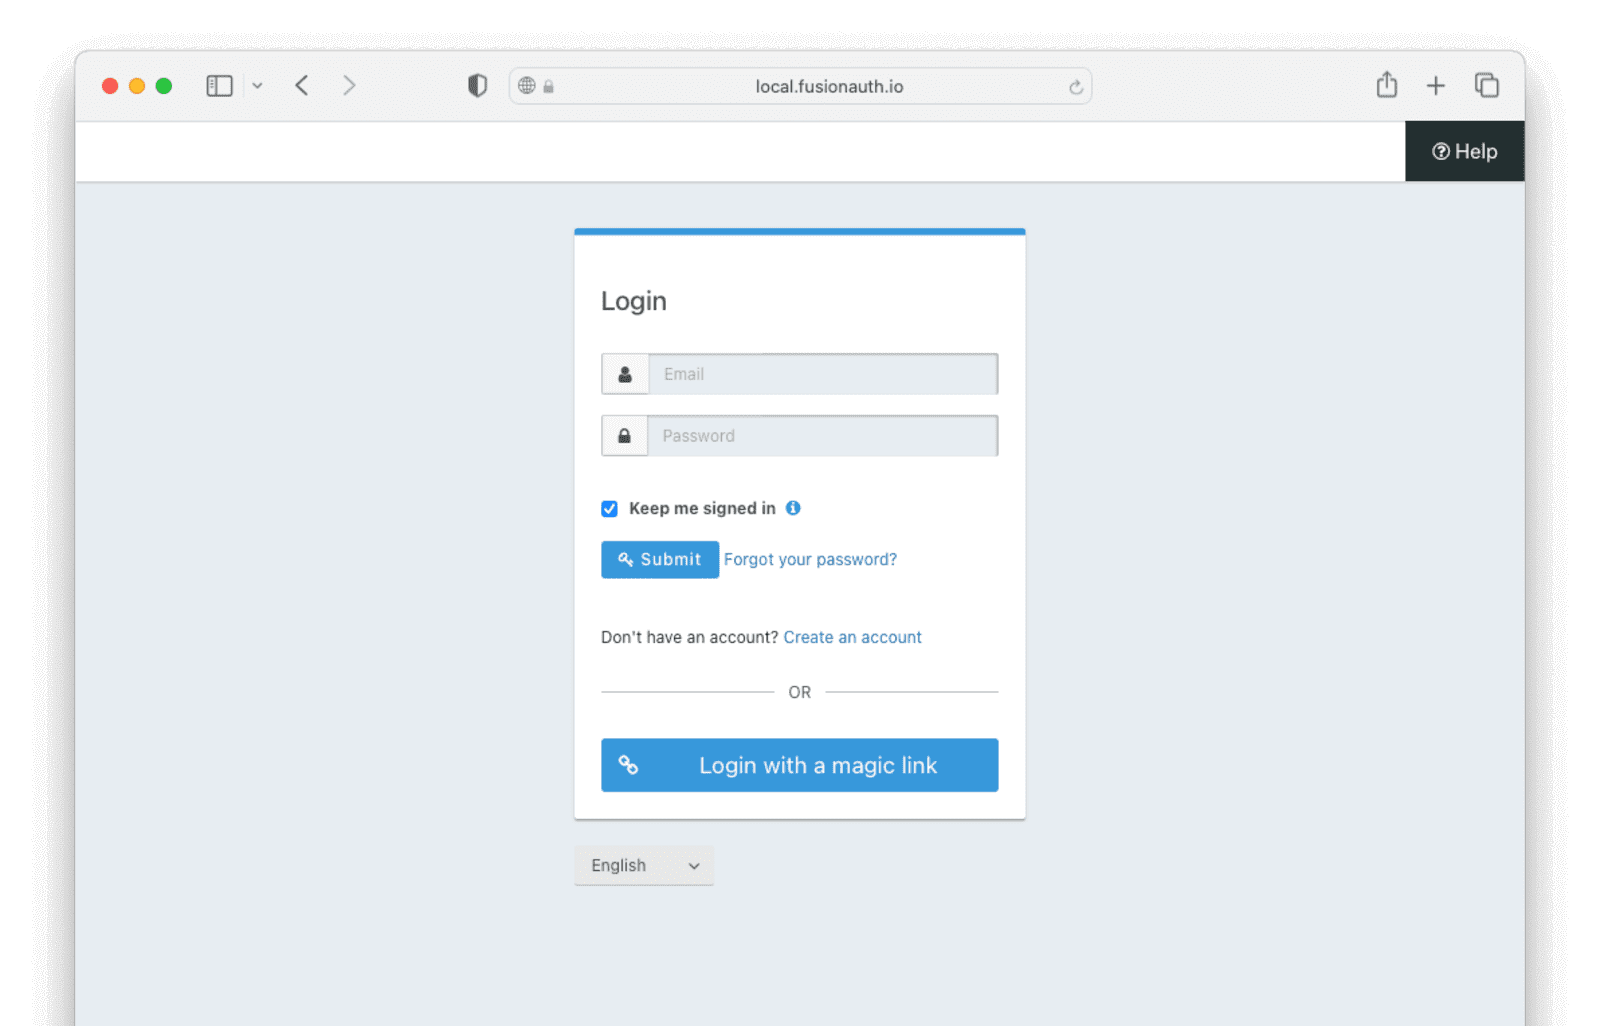 The FusionAuth Oauth2 login form including a passwordless log in option